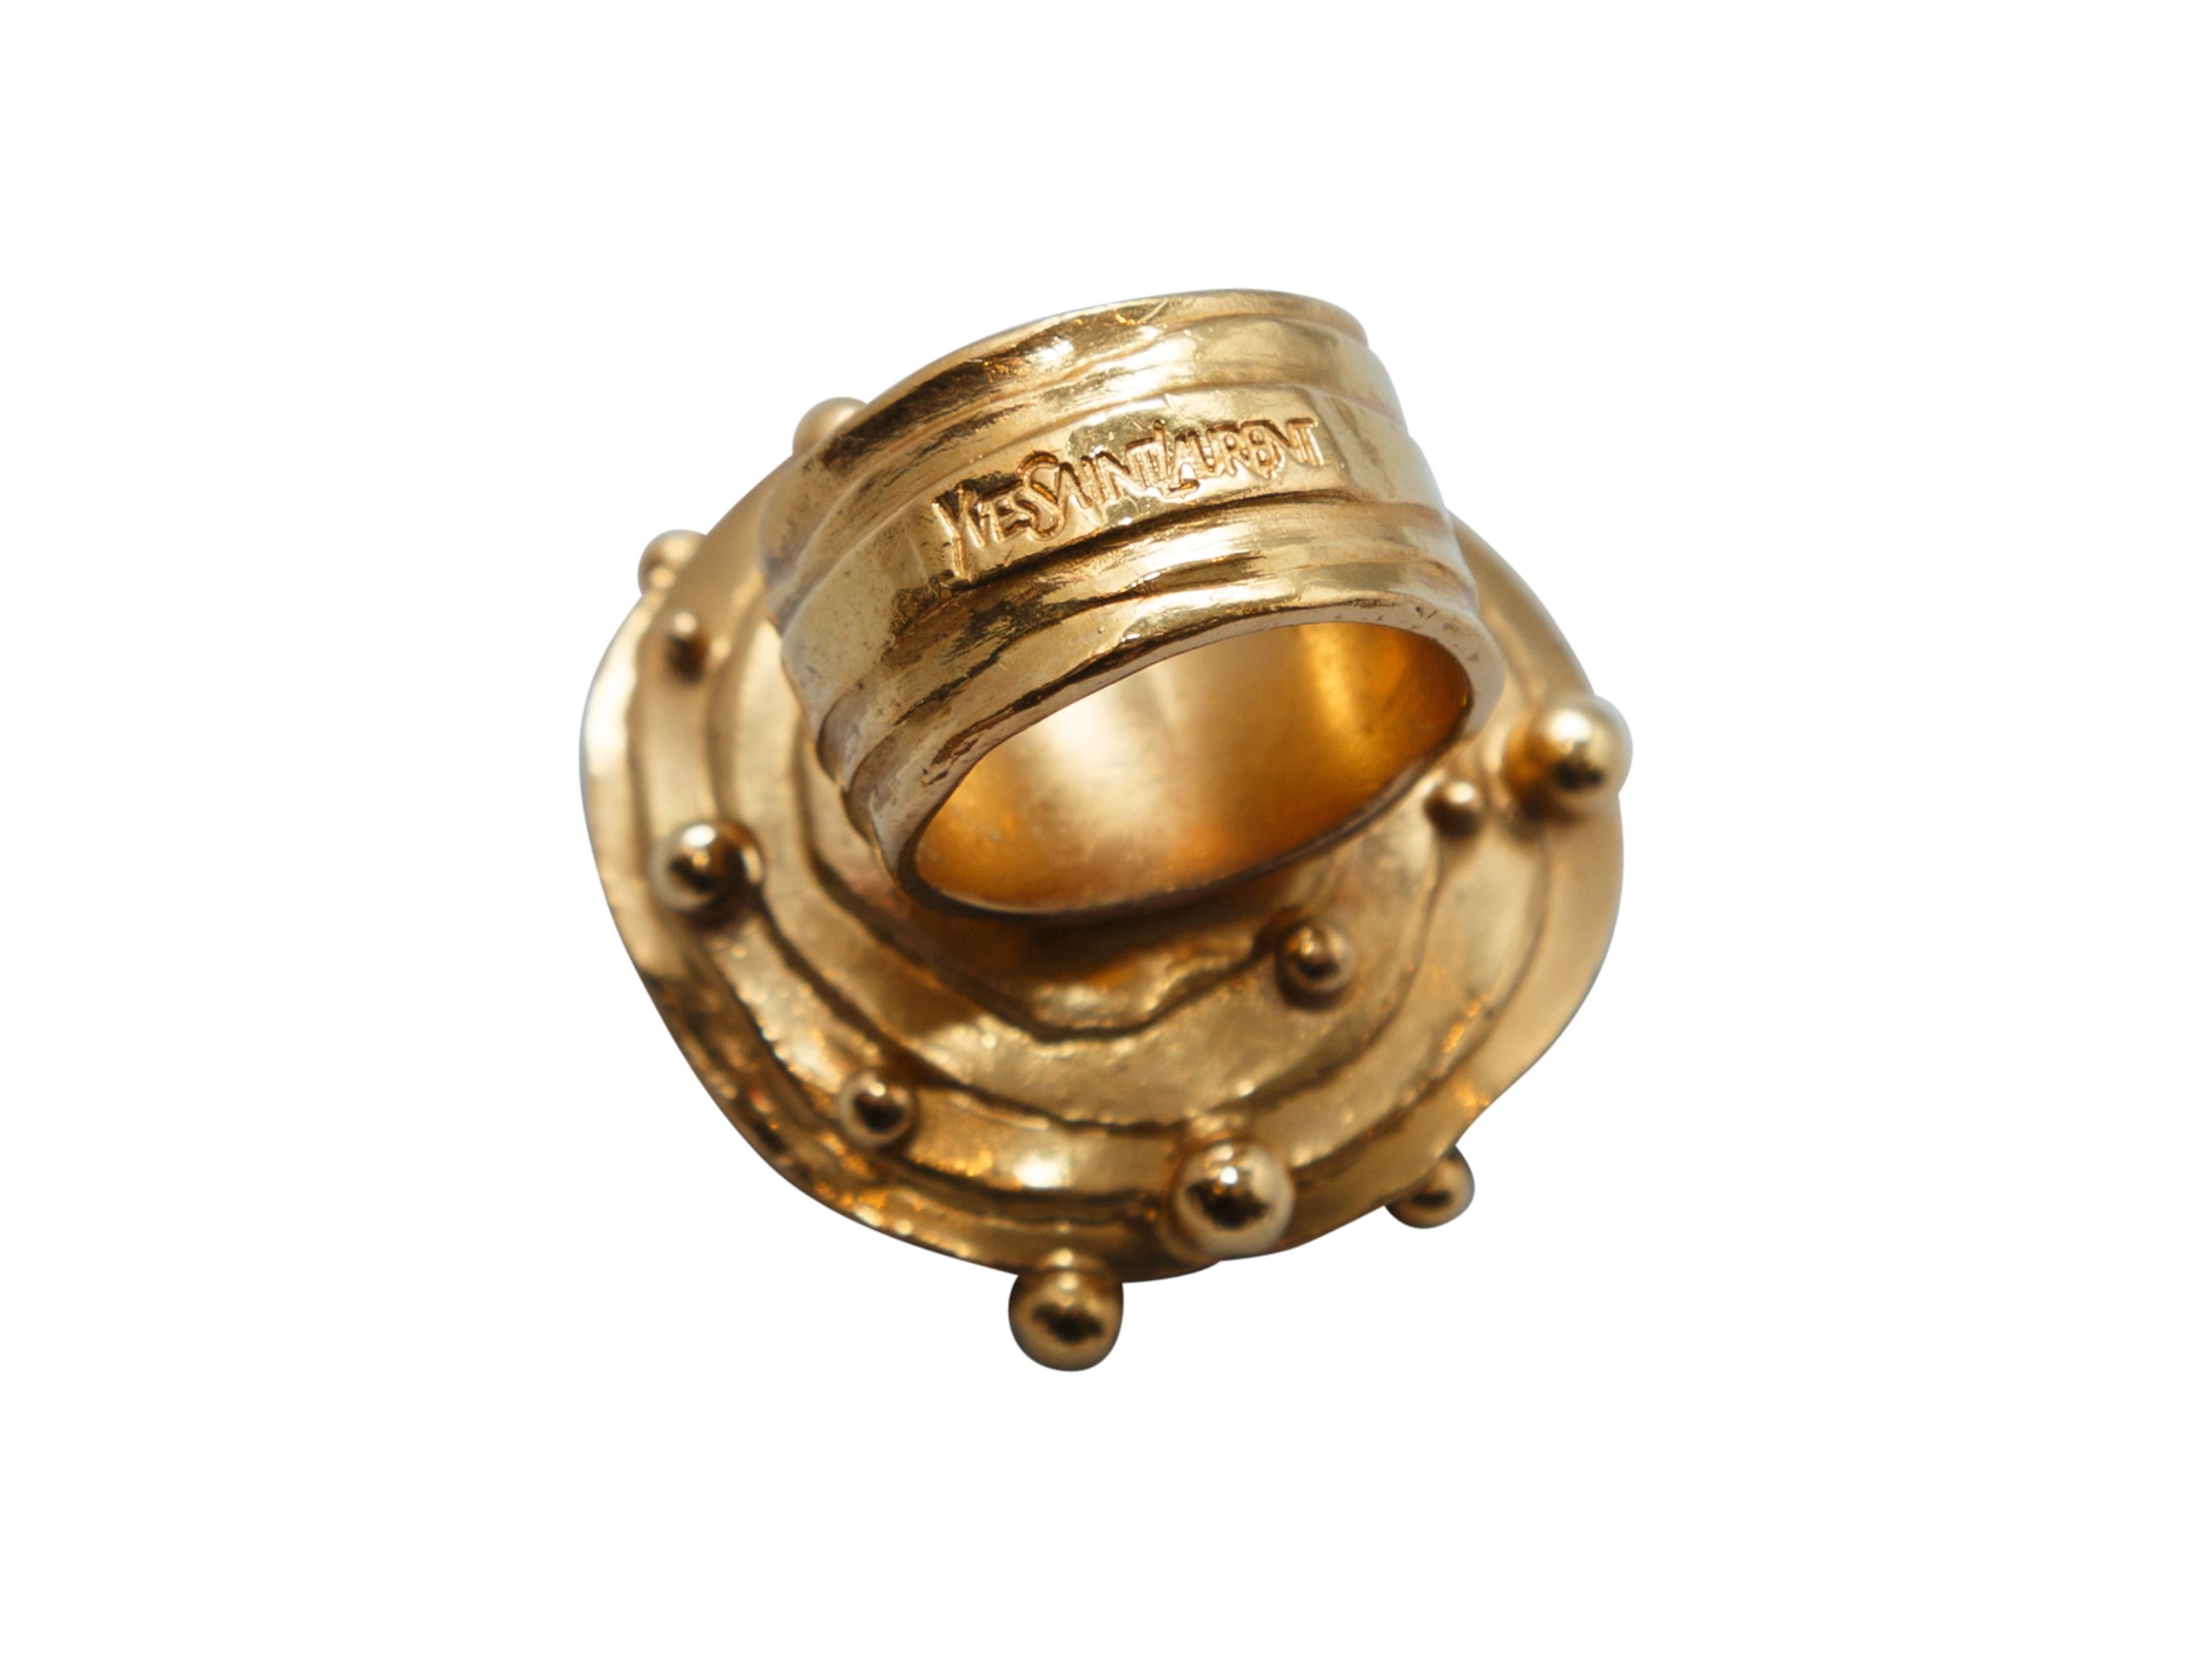 Product details: Gold-tone circular oversize ring by Yves Saint Laurent. Wide band. 1.38